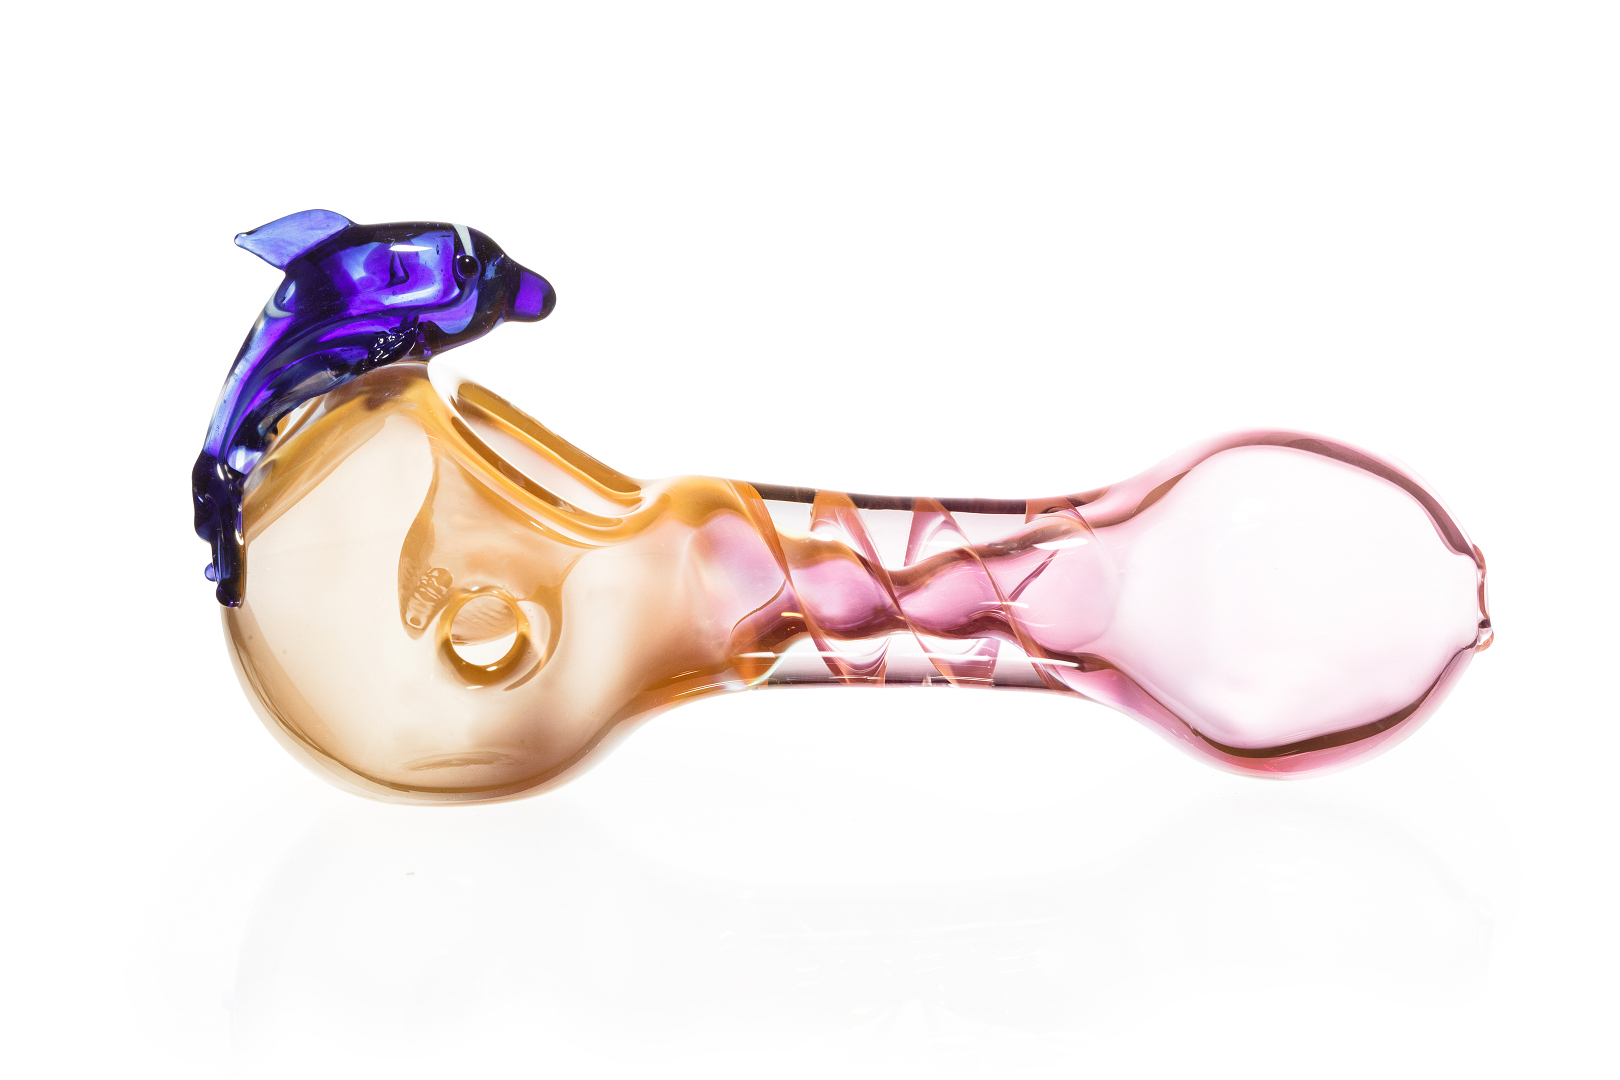 Unique glass pipes Long glass color changing smoking spoon pipe Relaxation Glass smoking pipe